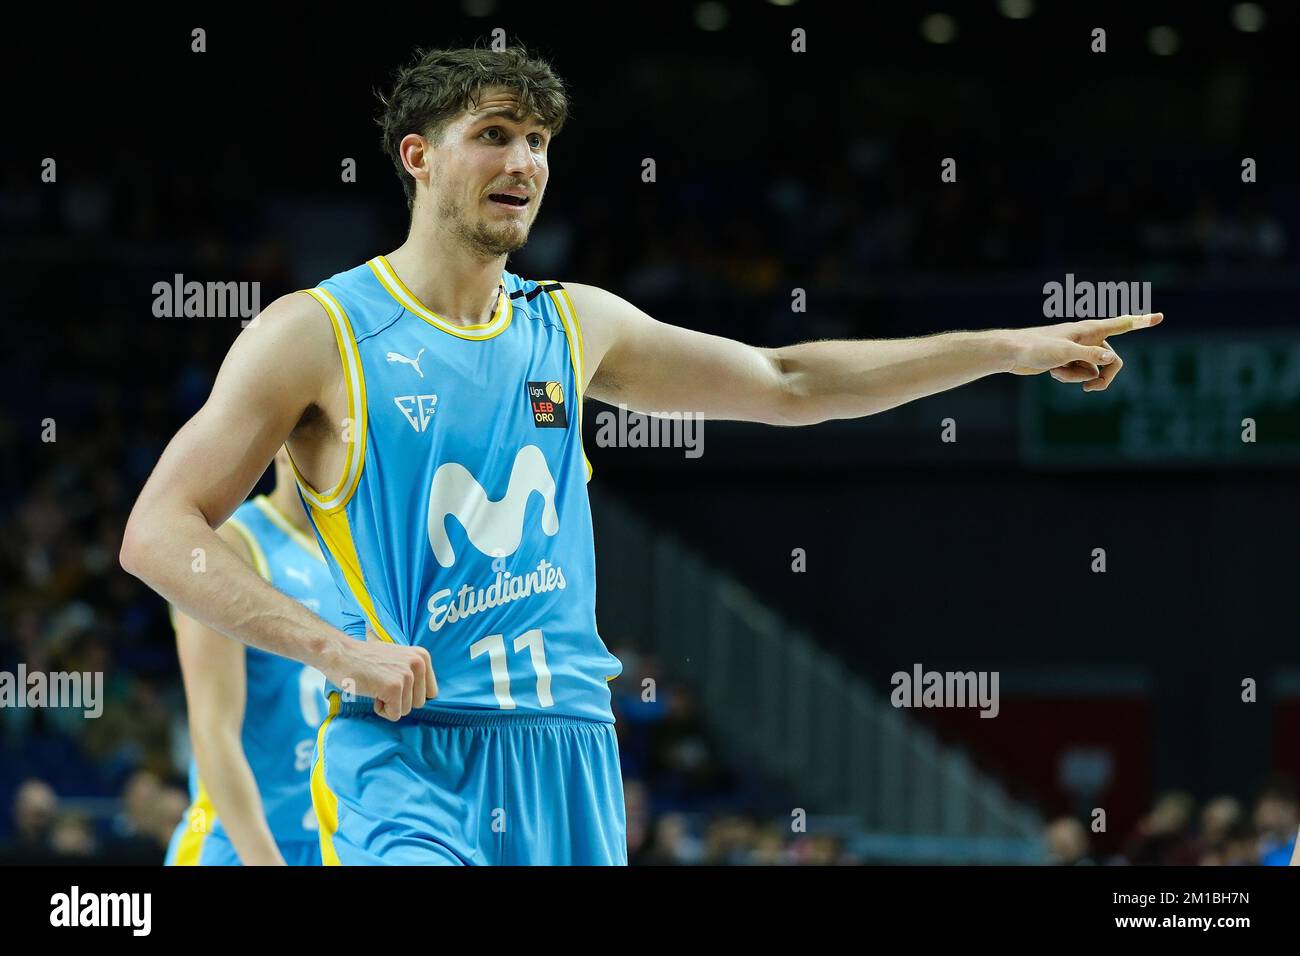 Madrid, Spain. 11th Dec, 2022. Player Hector Alderete of Movistar  Estudiantes seen in action during the Spanish league, Liga LEB Oro,  basketball match between Movistar Estudiantes and TAU Castello at Wizink  Center